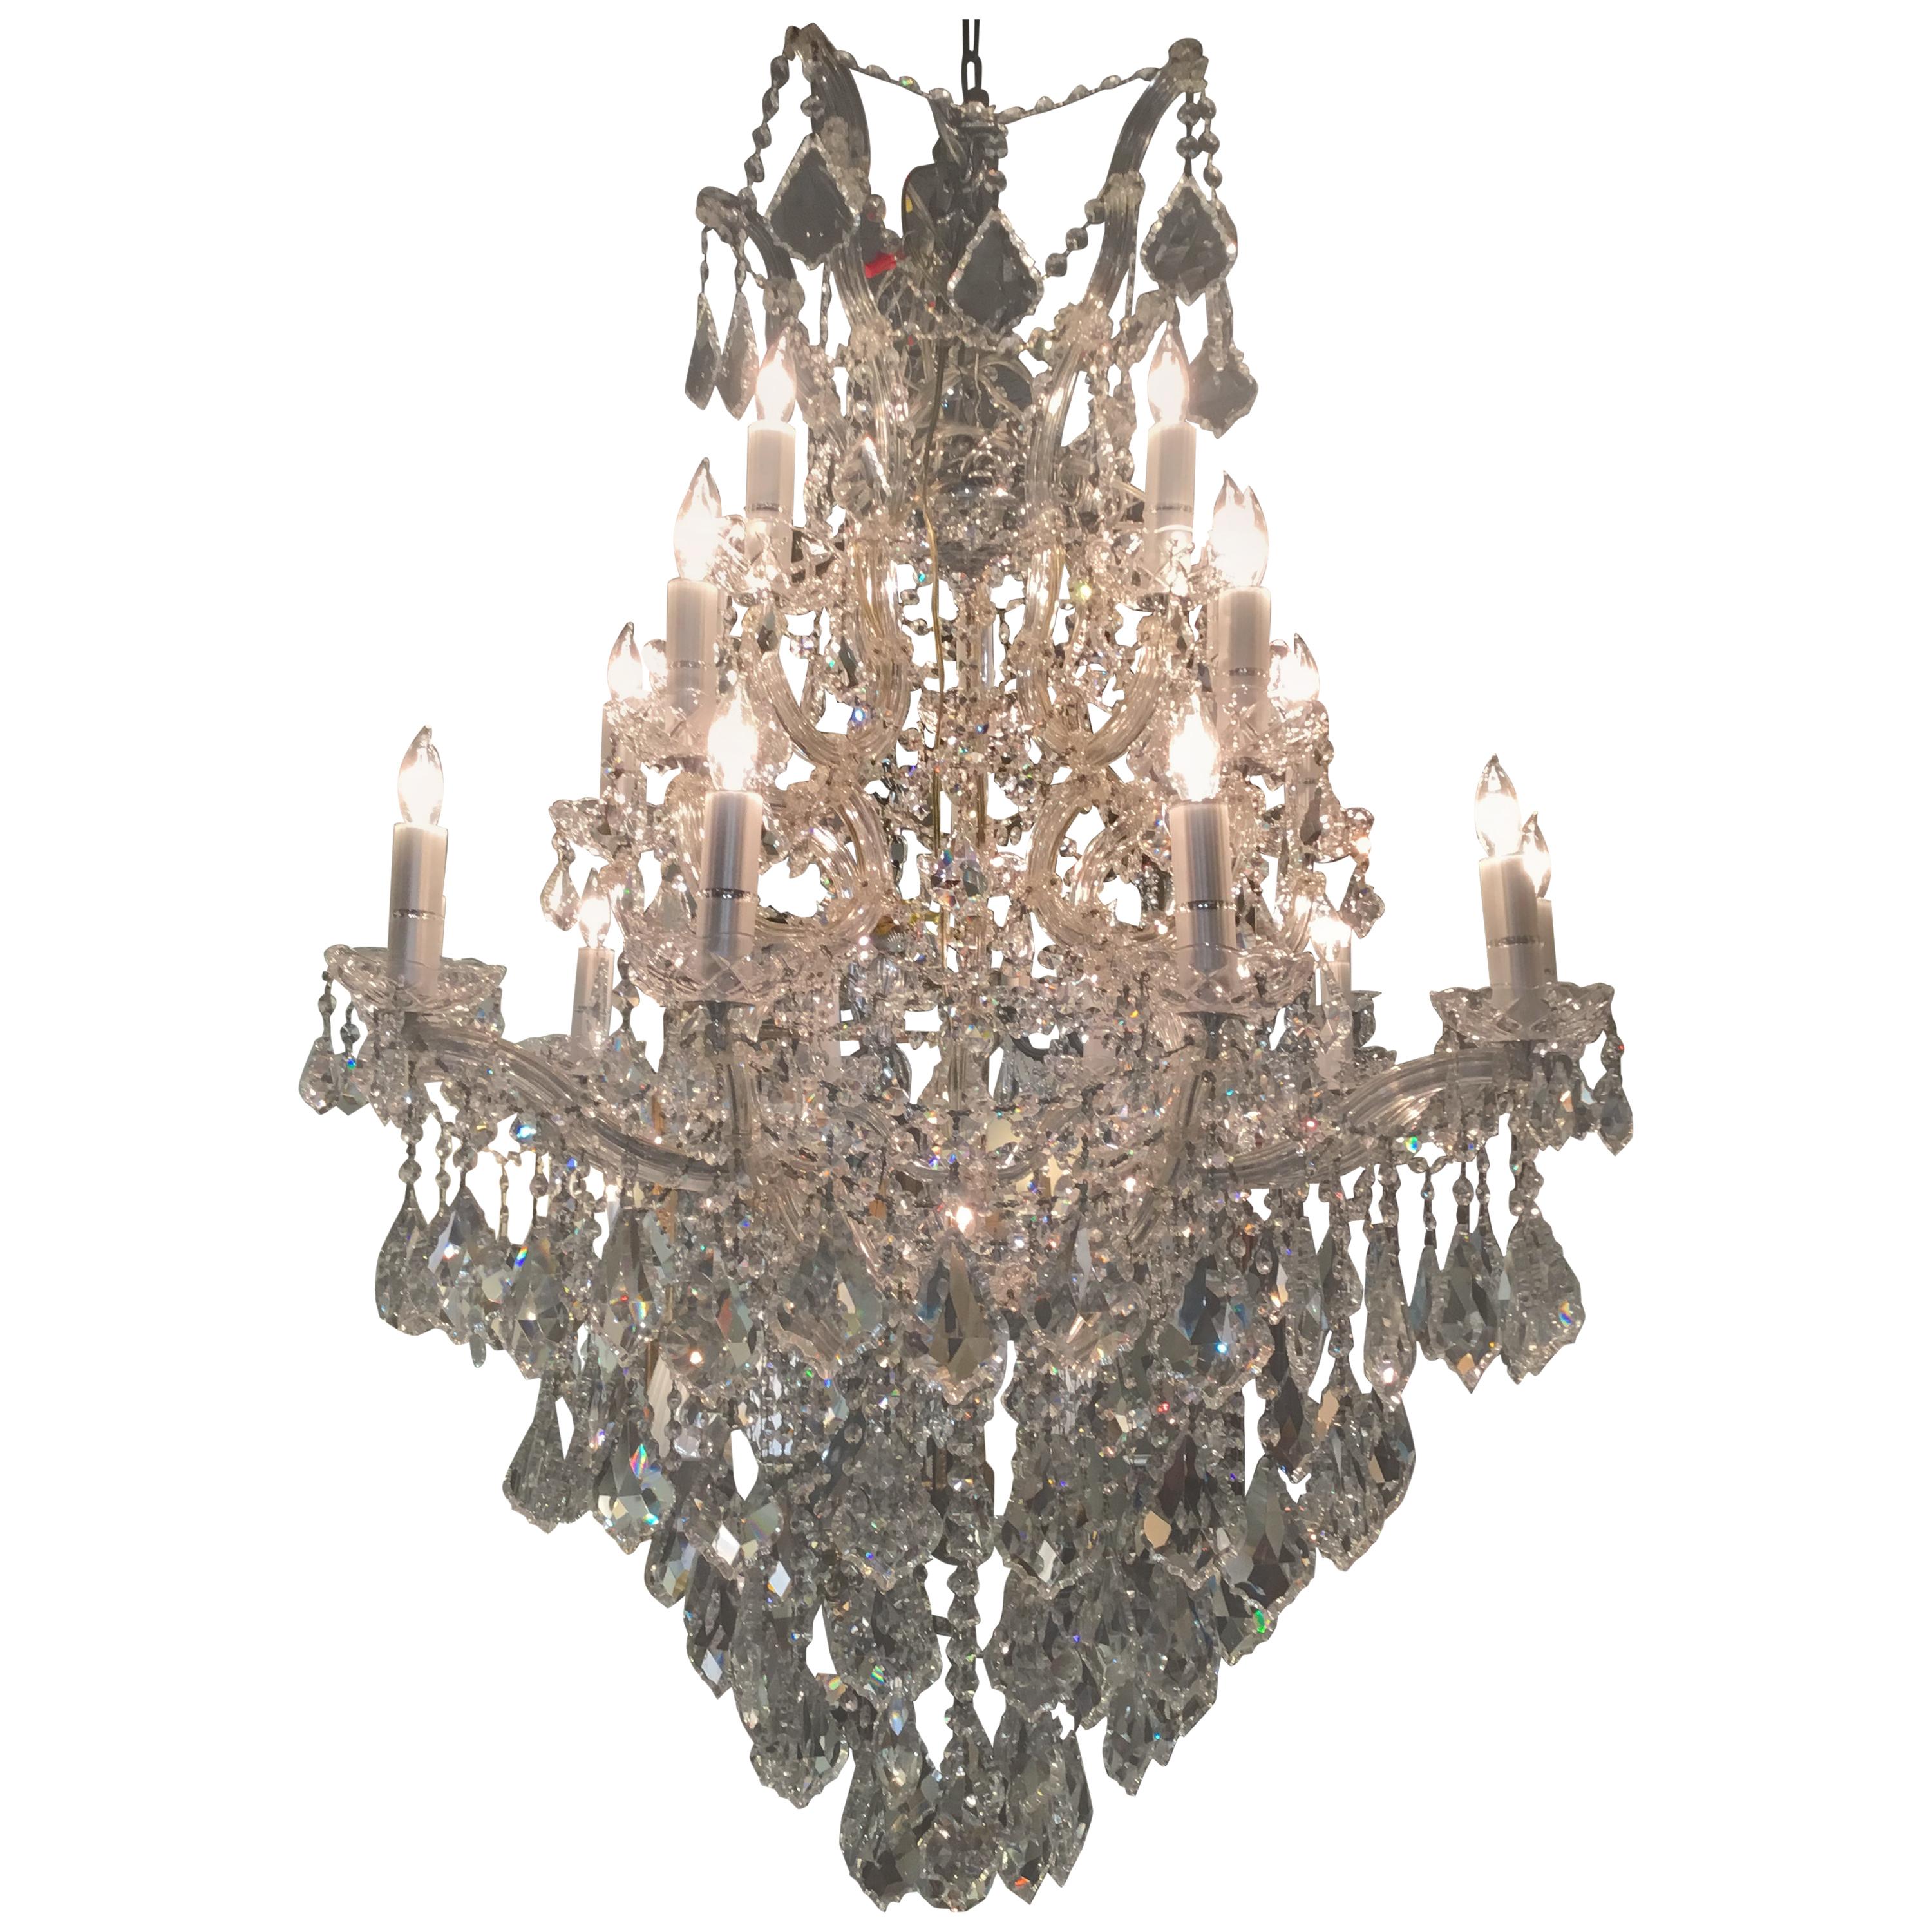 Large 20-Light Crystal French Style Chandelier with Glass Arms